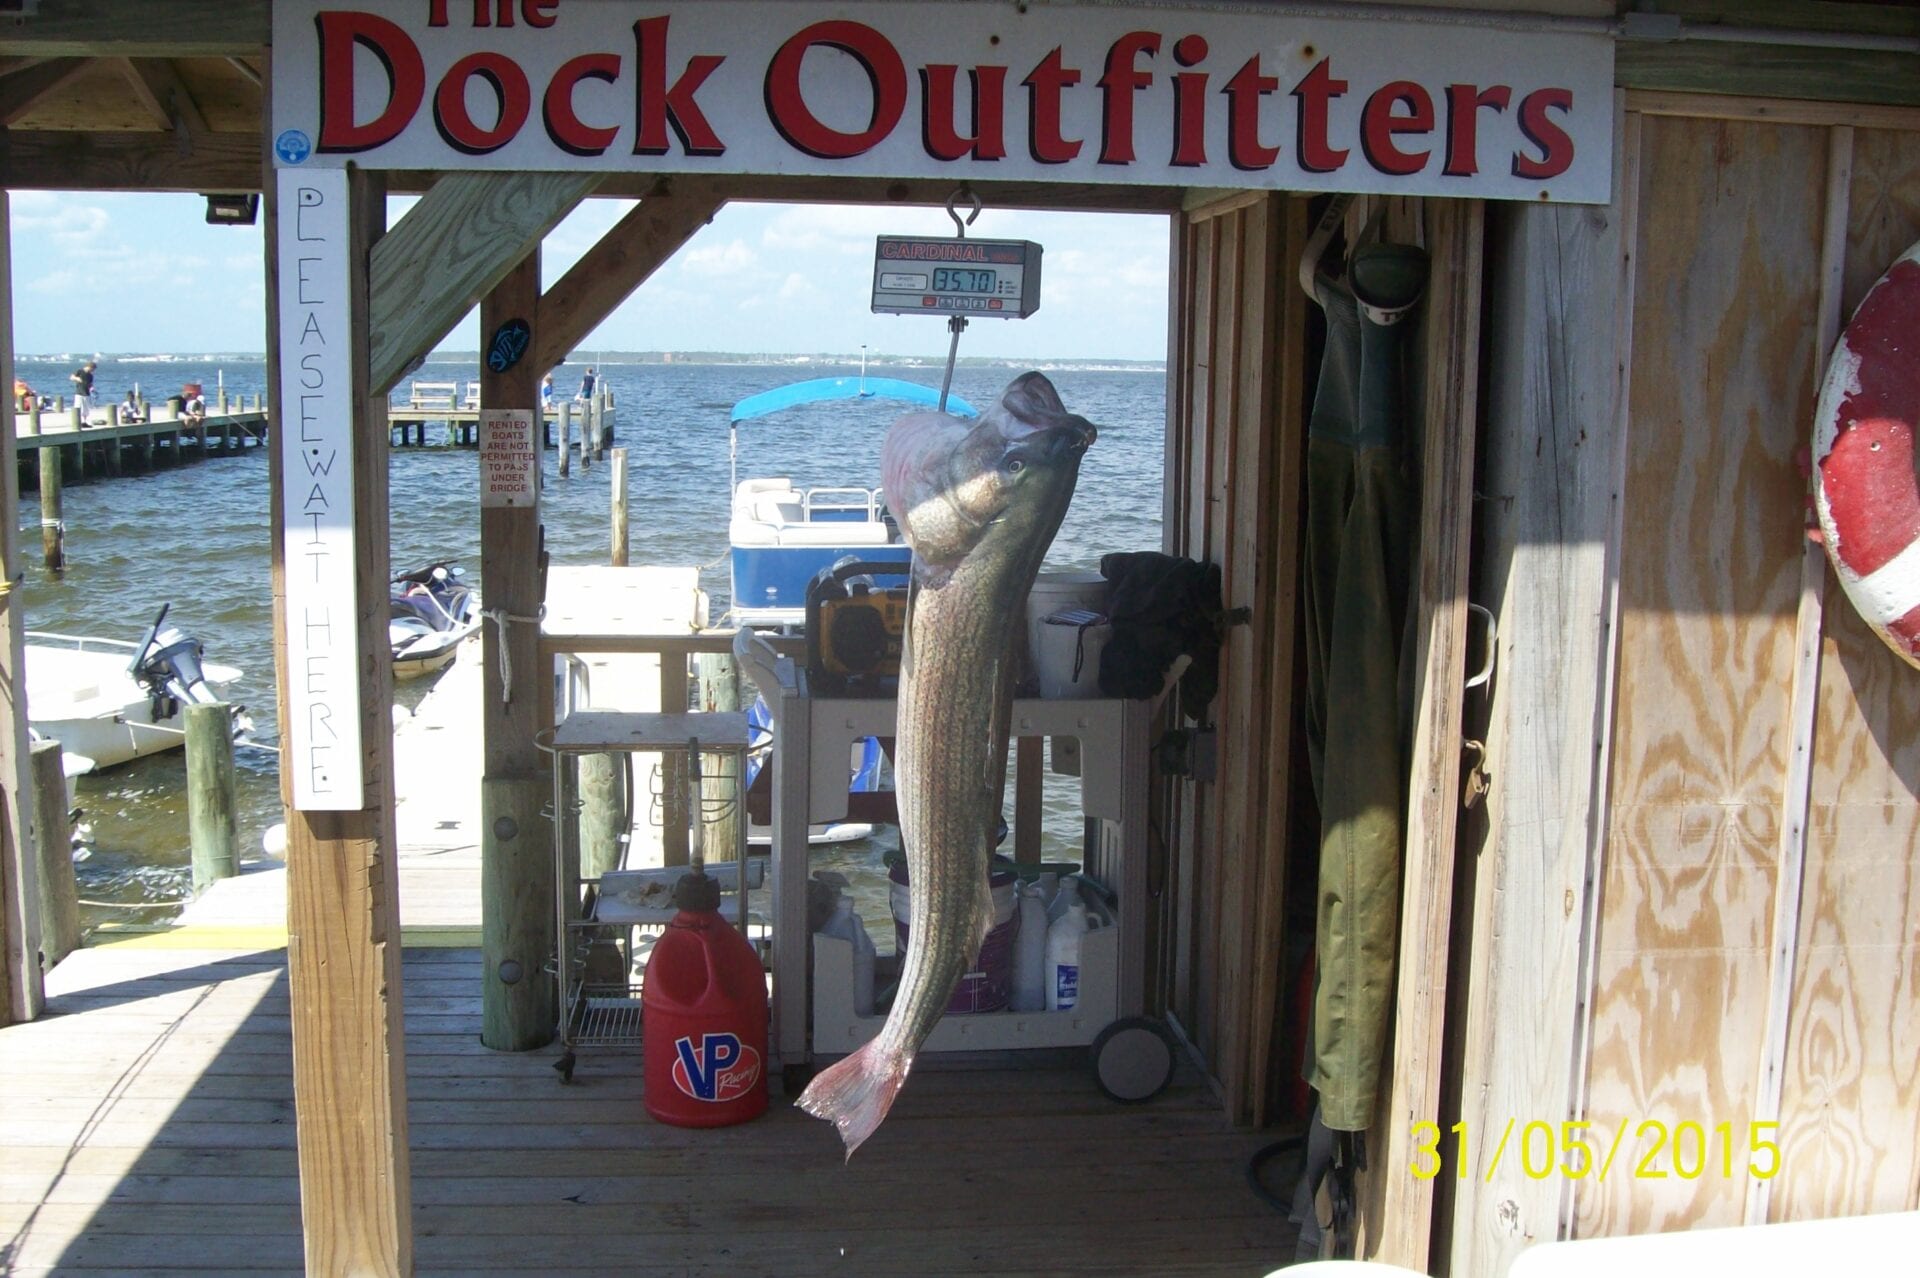 A place with The Dock Outfitters signage